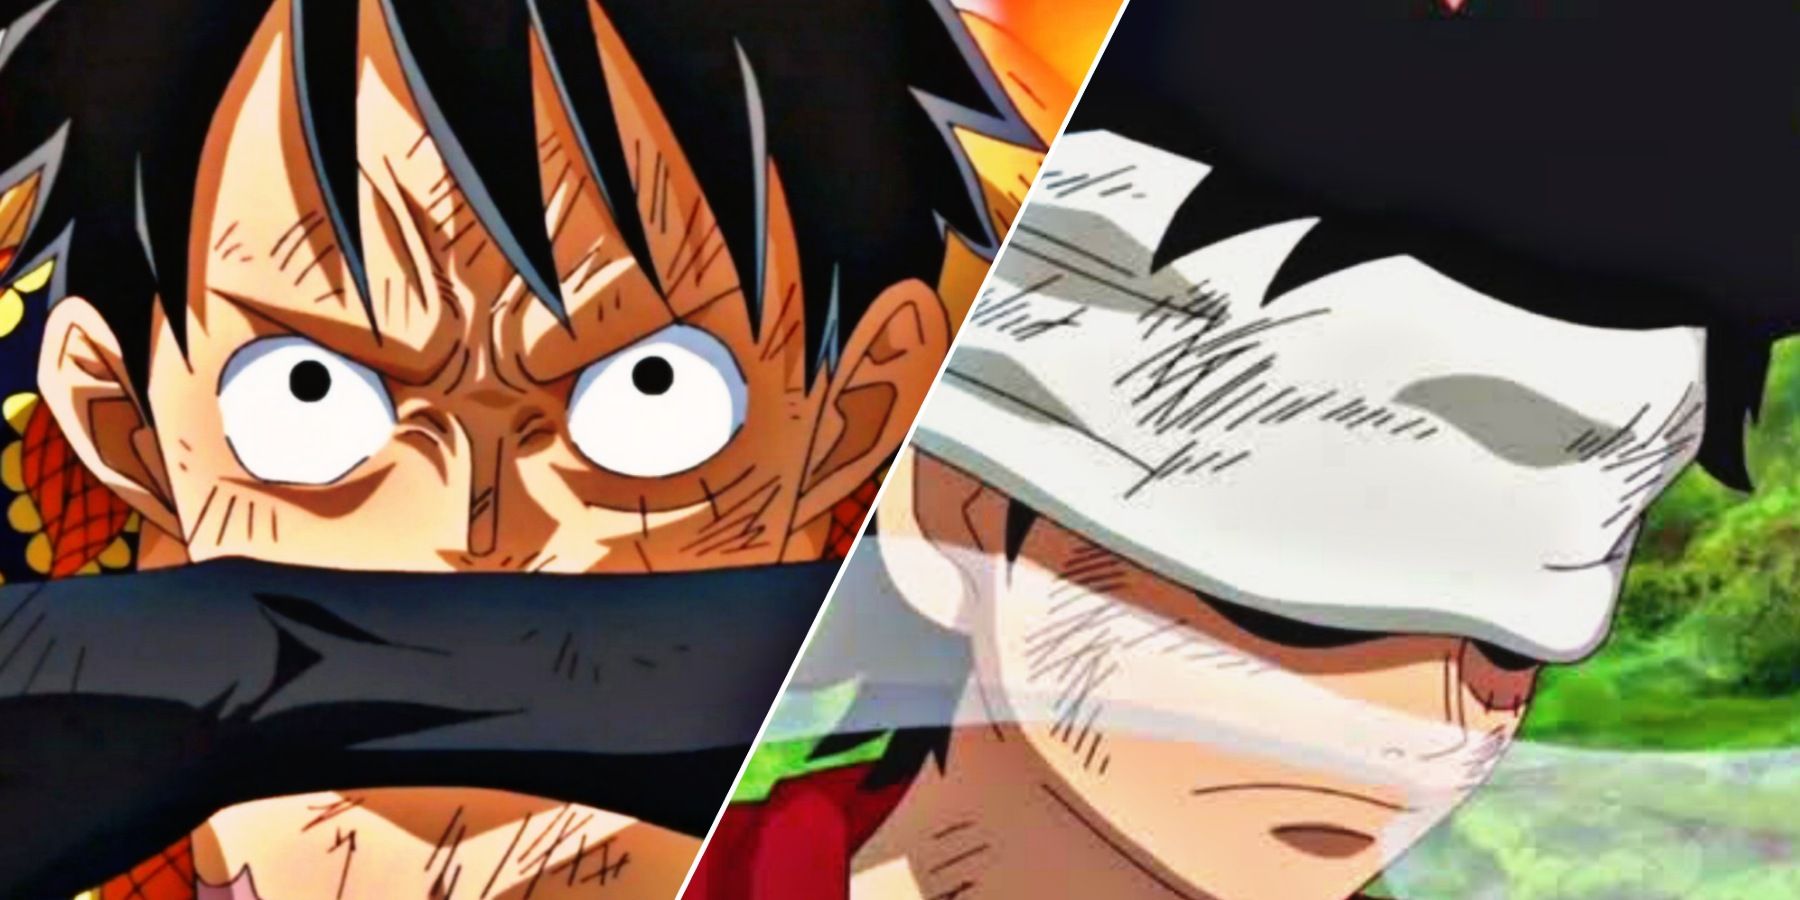 Do you guys think that Invisible Armament Haki is real? : r/OnePiece